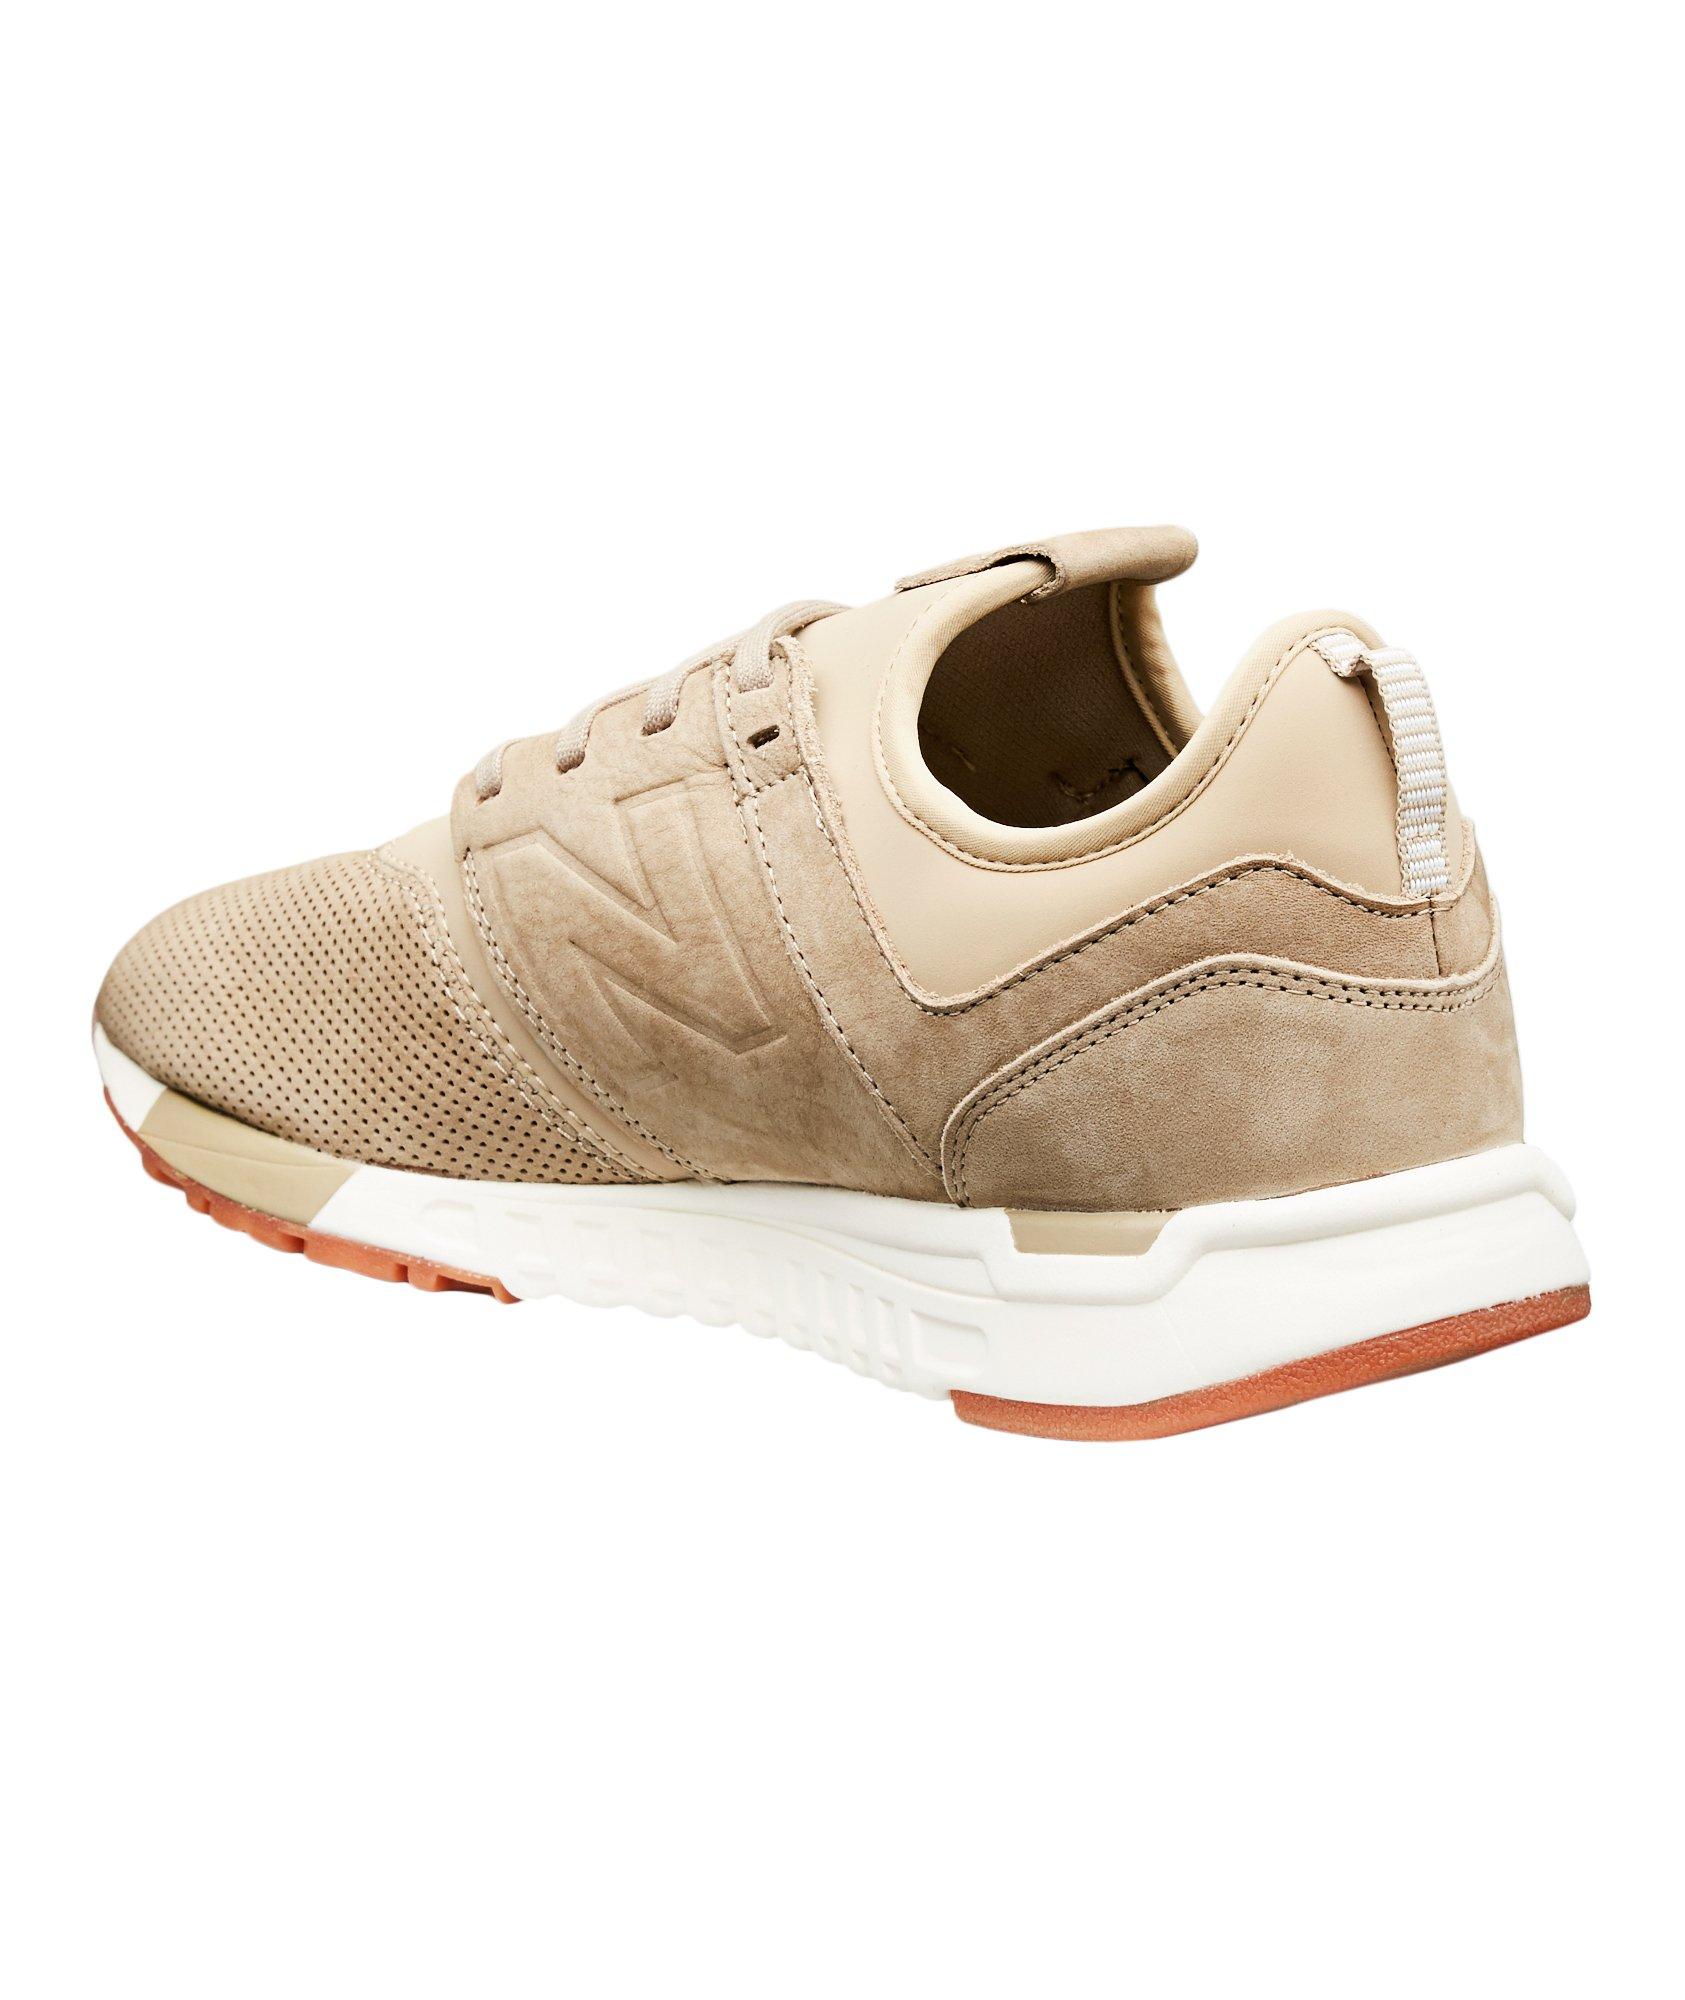 247 Luxe Sneakers image 1